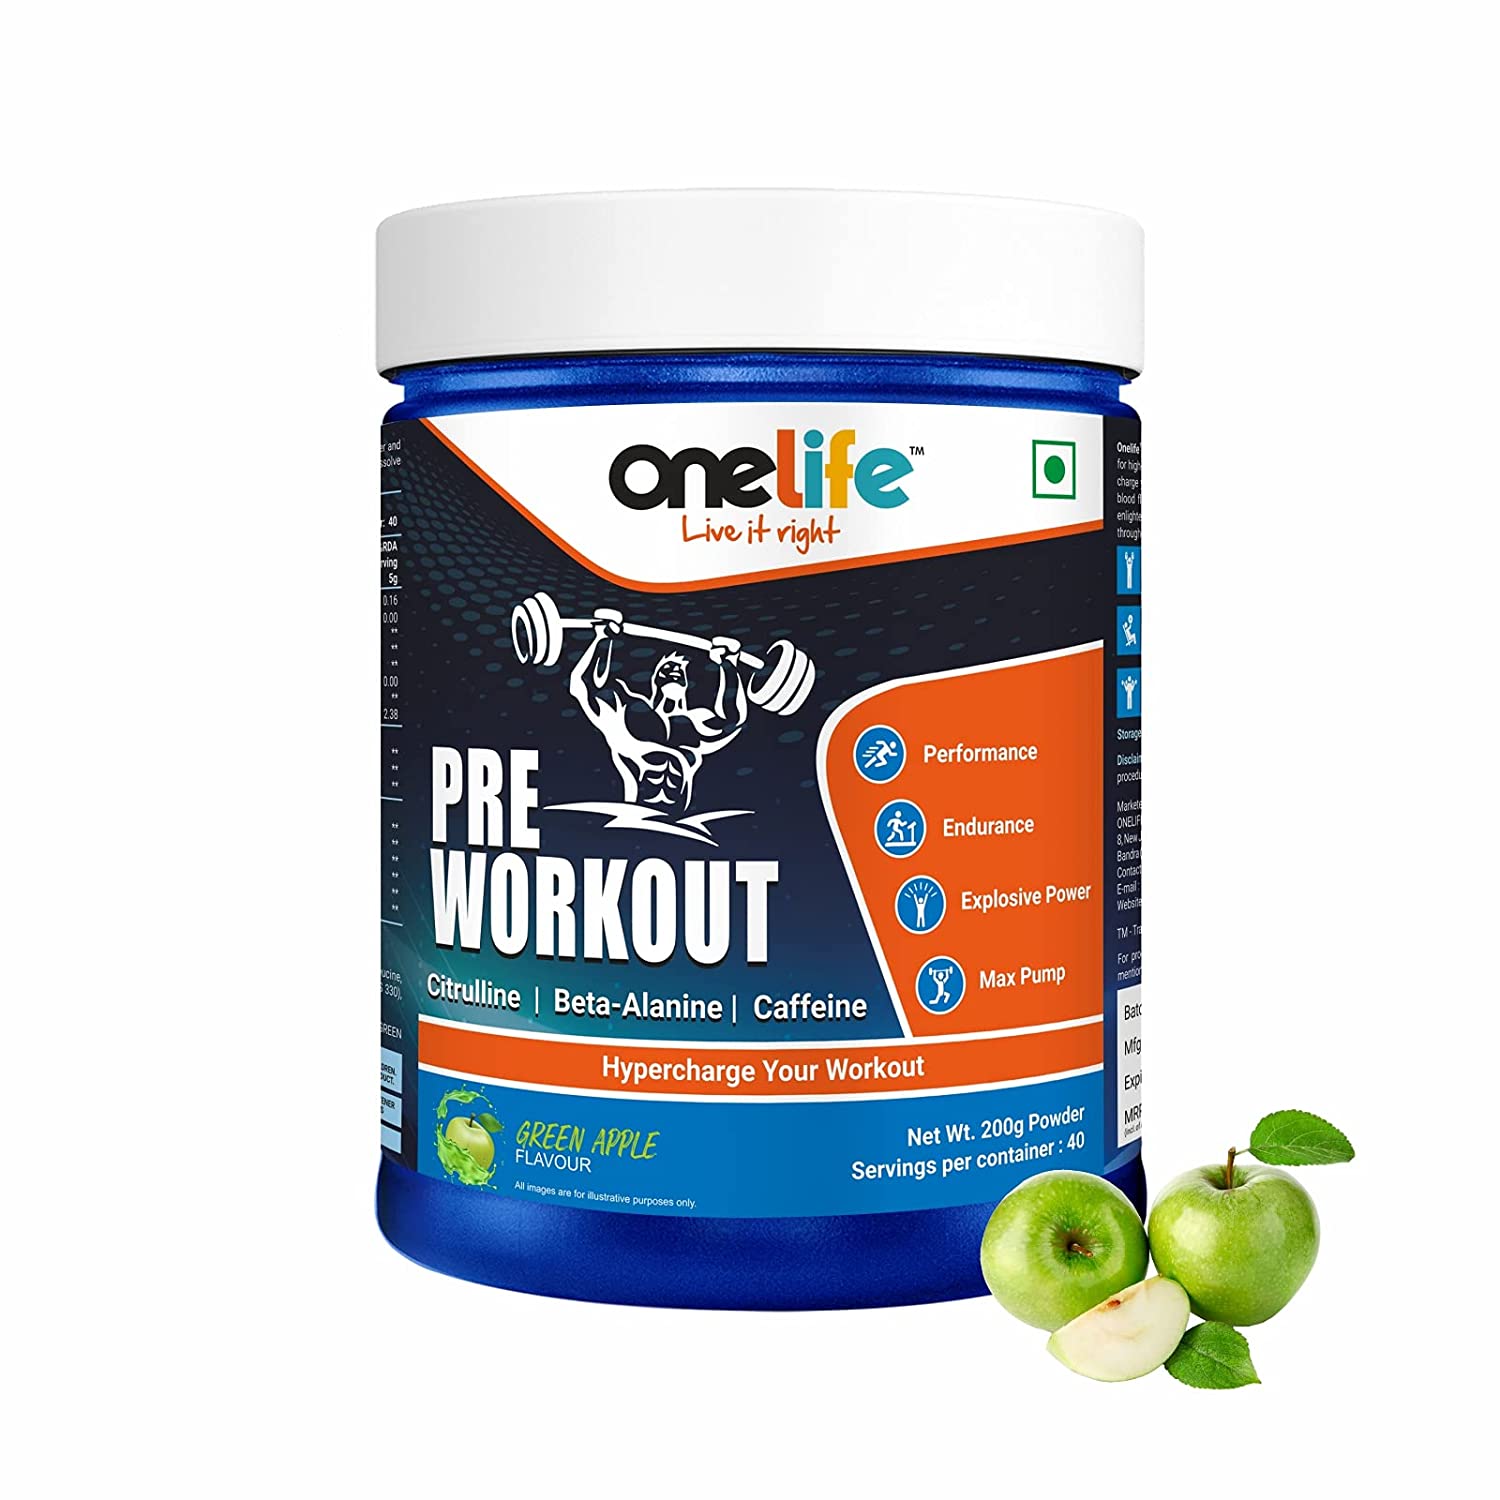 Onelife PreWorkout Supplement Image